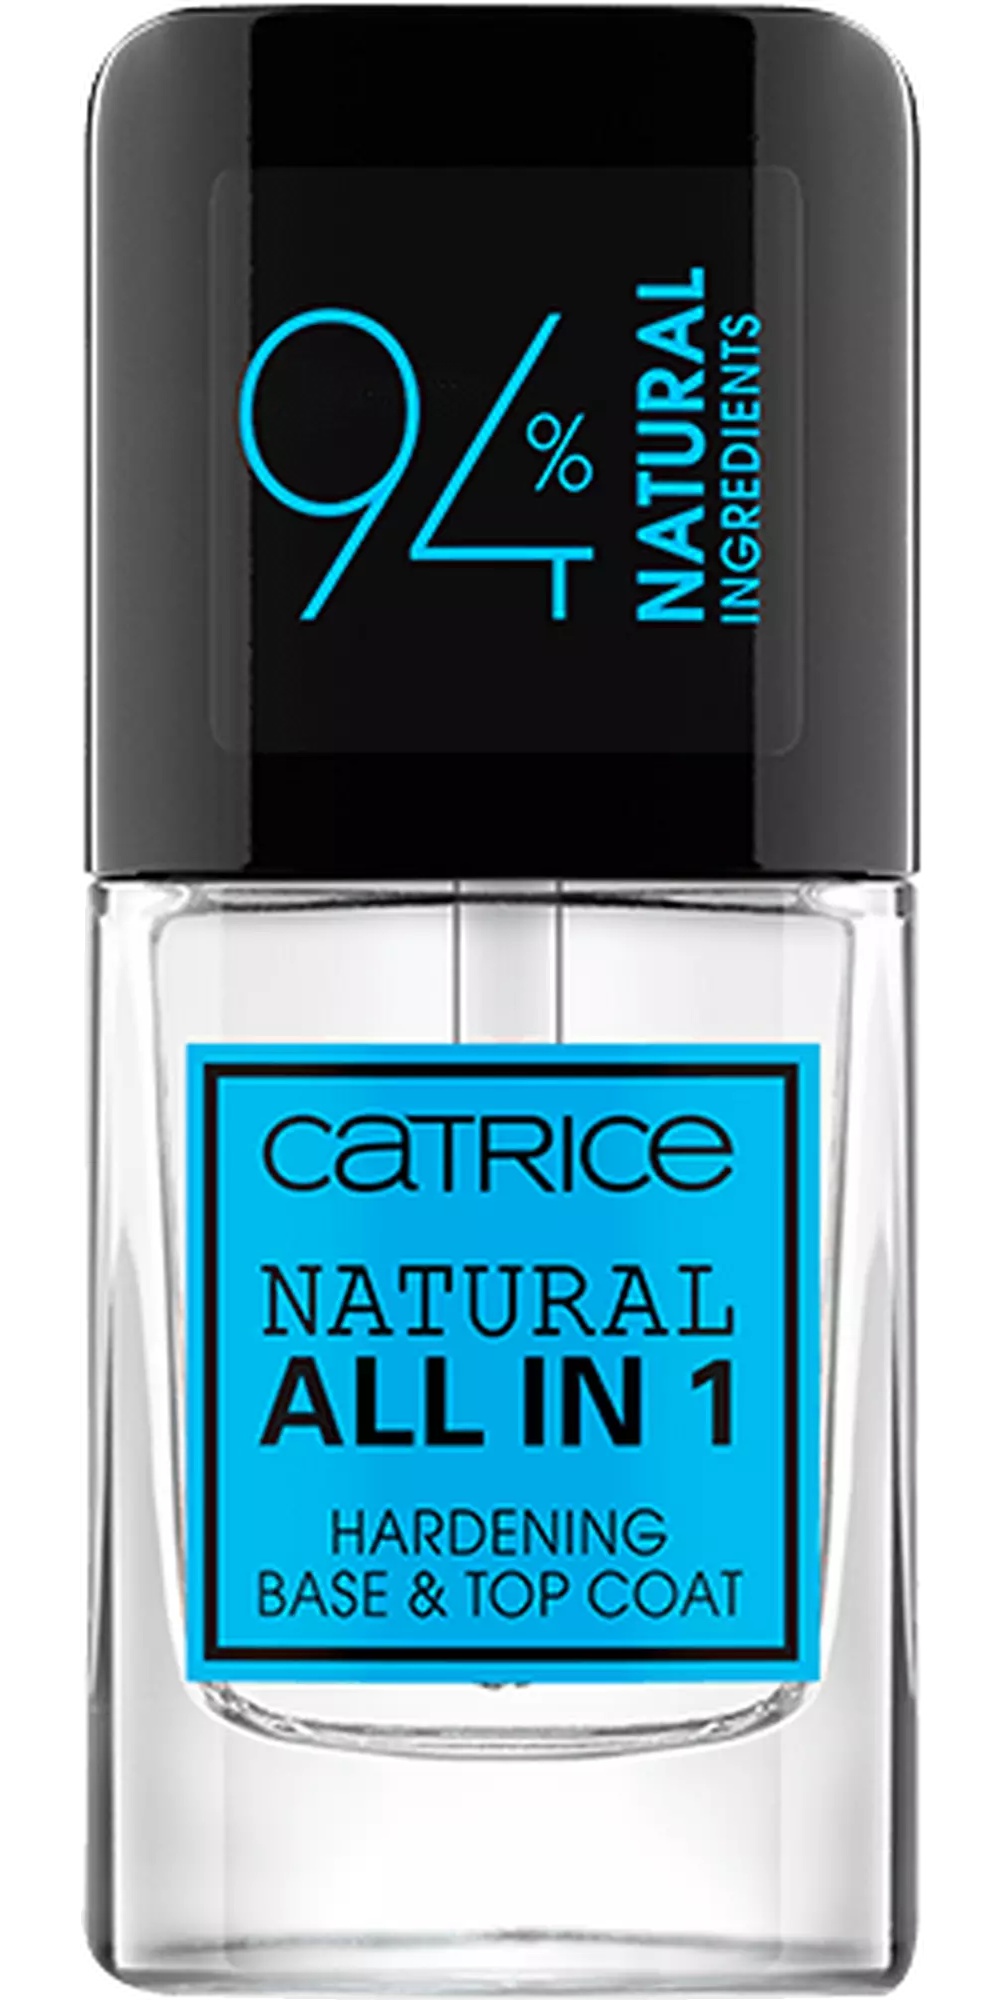 Catrice Natural All In 1 Hardening Base & Top Coat